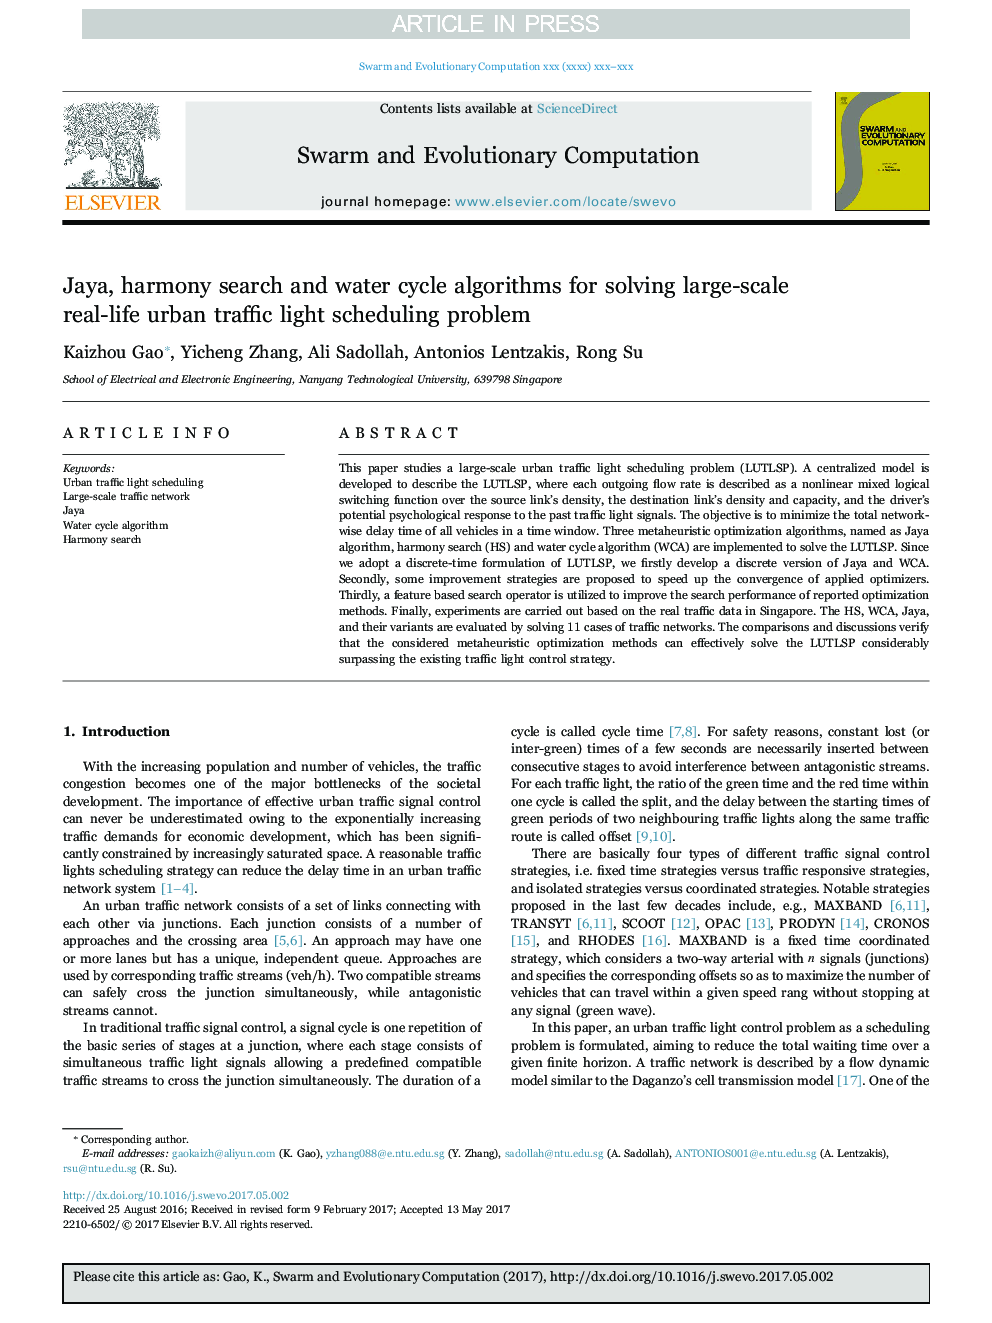 Jaya, harmony search and water cycle algorithms for solving large-scale real-life urban traffic light scheduling problem